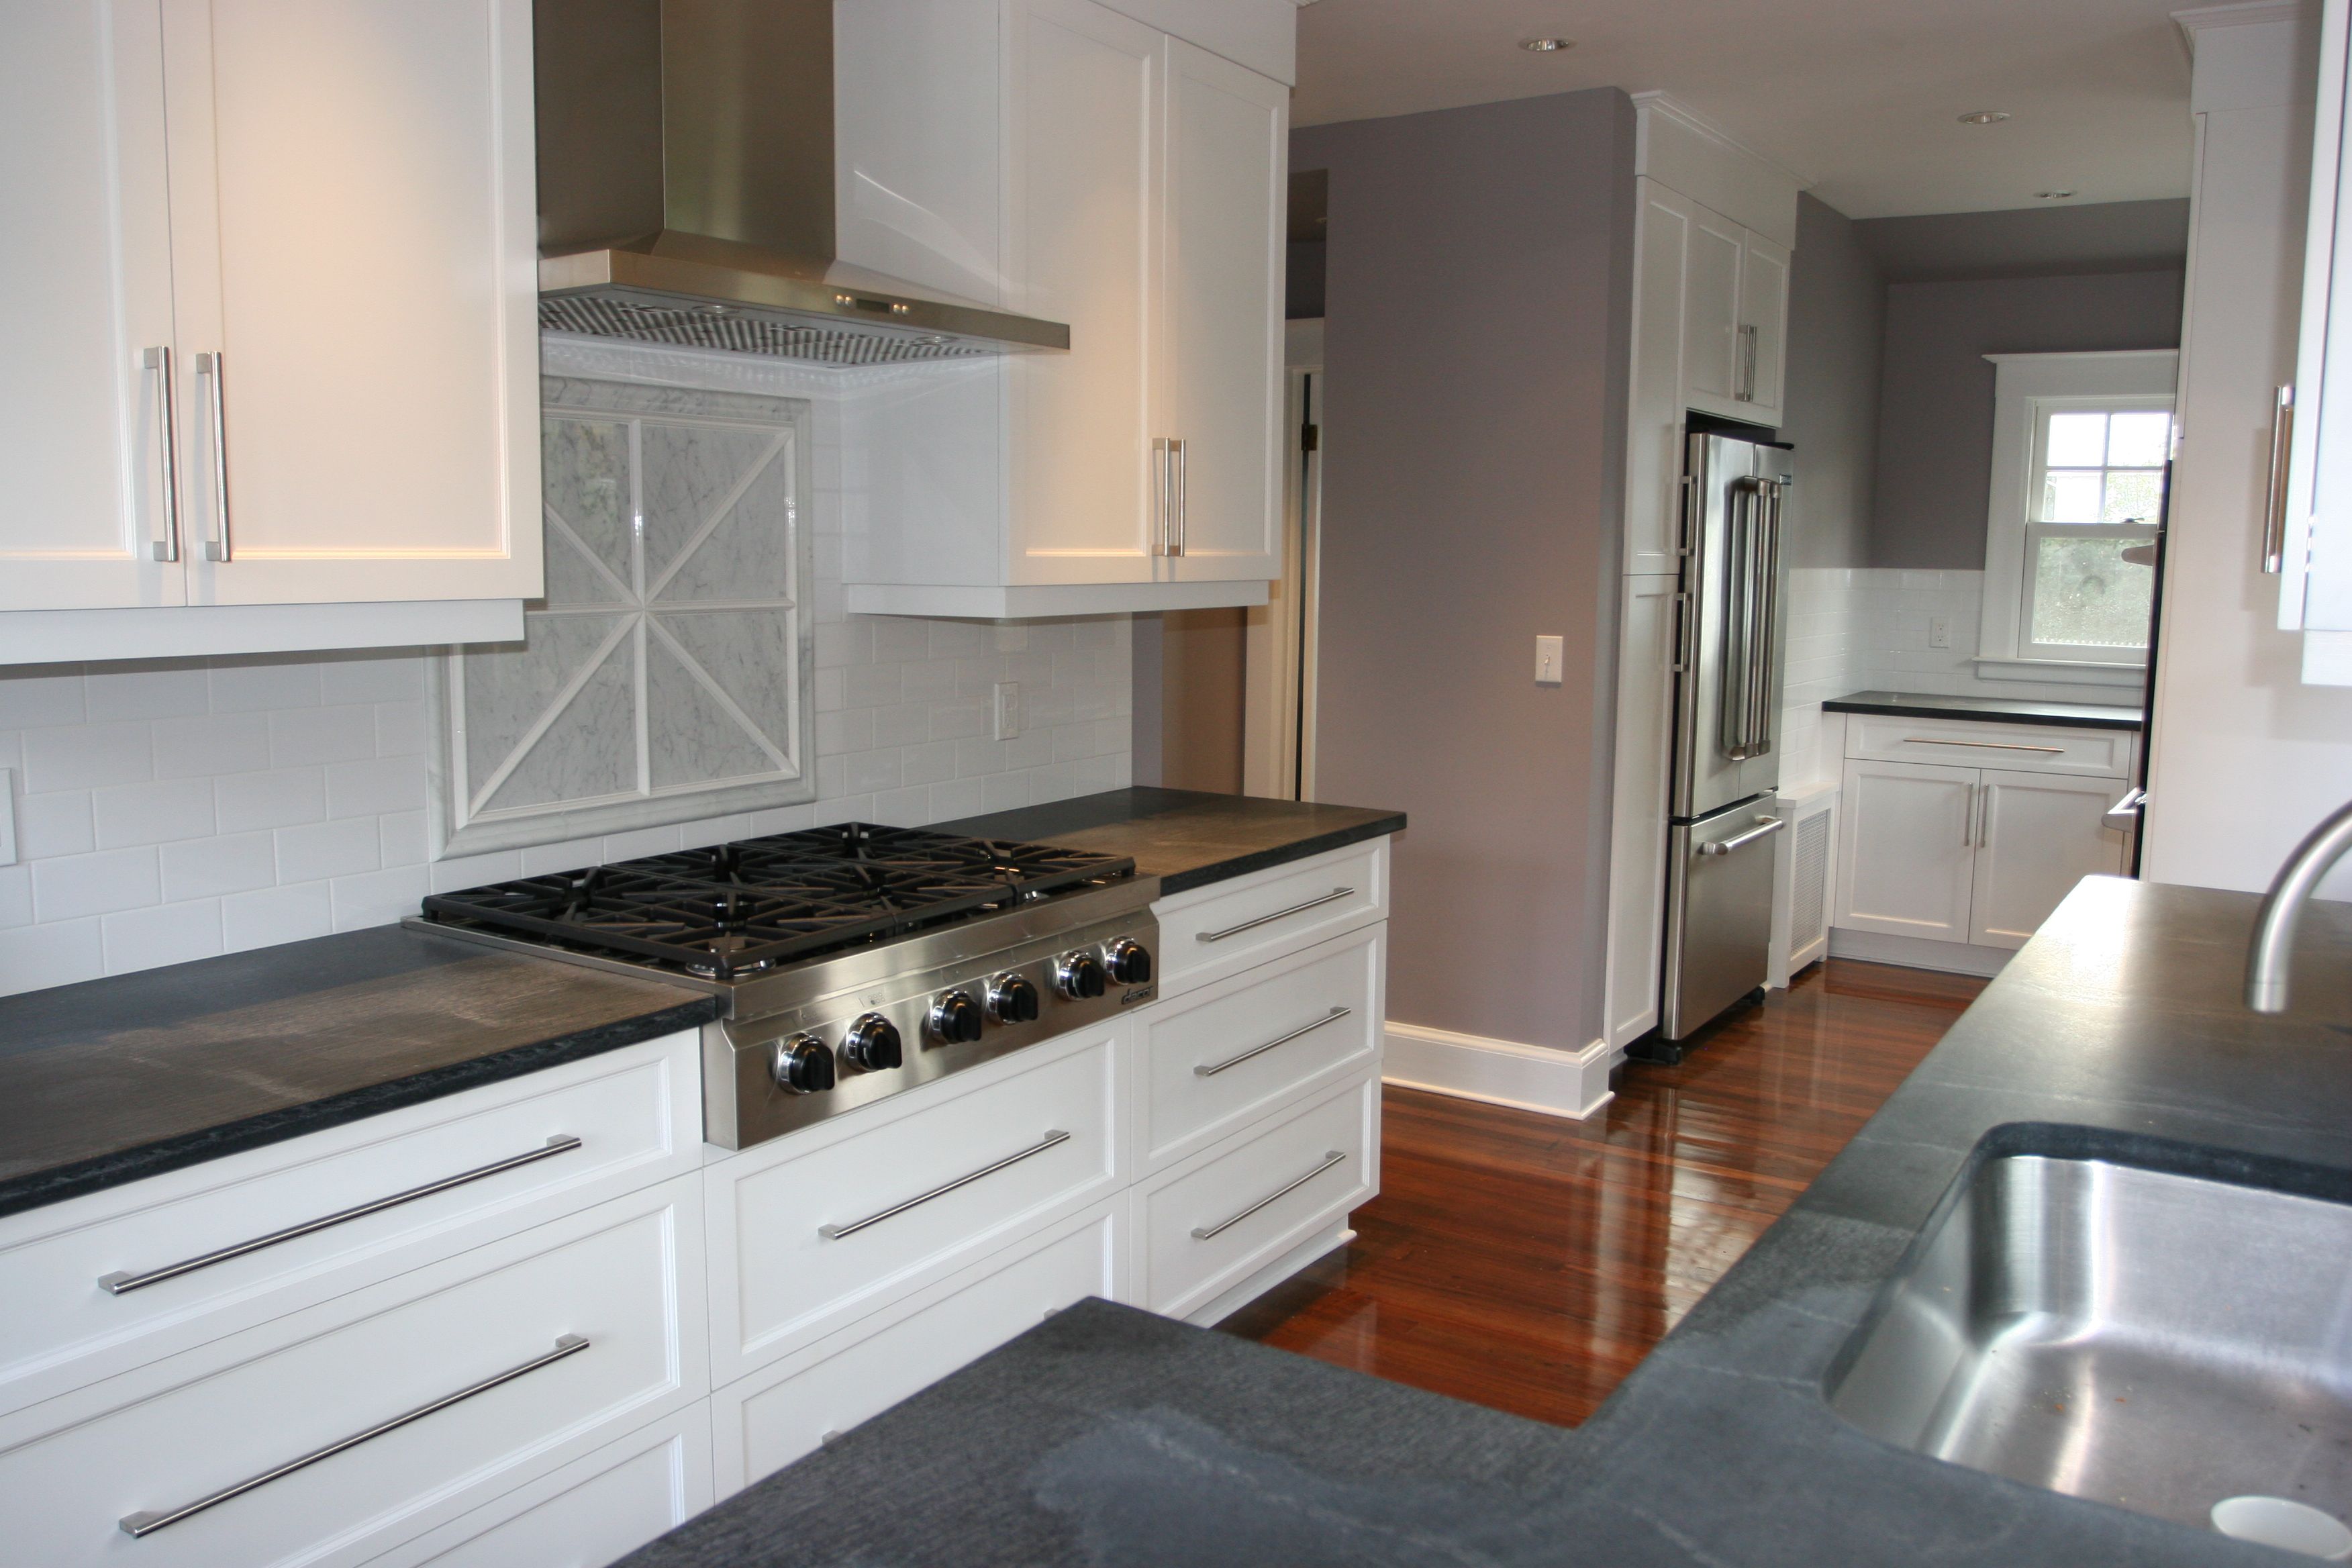 Cooktop by Dacor, Millenium series. Hood by Electrolux. All paints by Benjamin Moore.